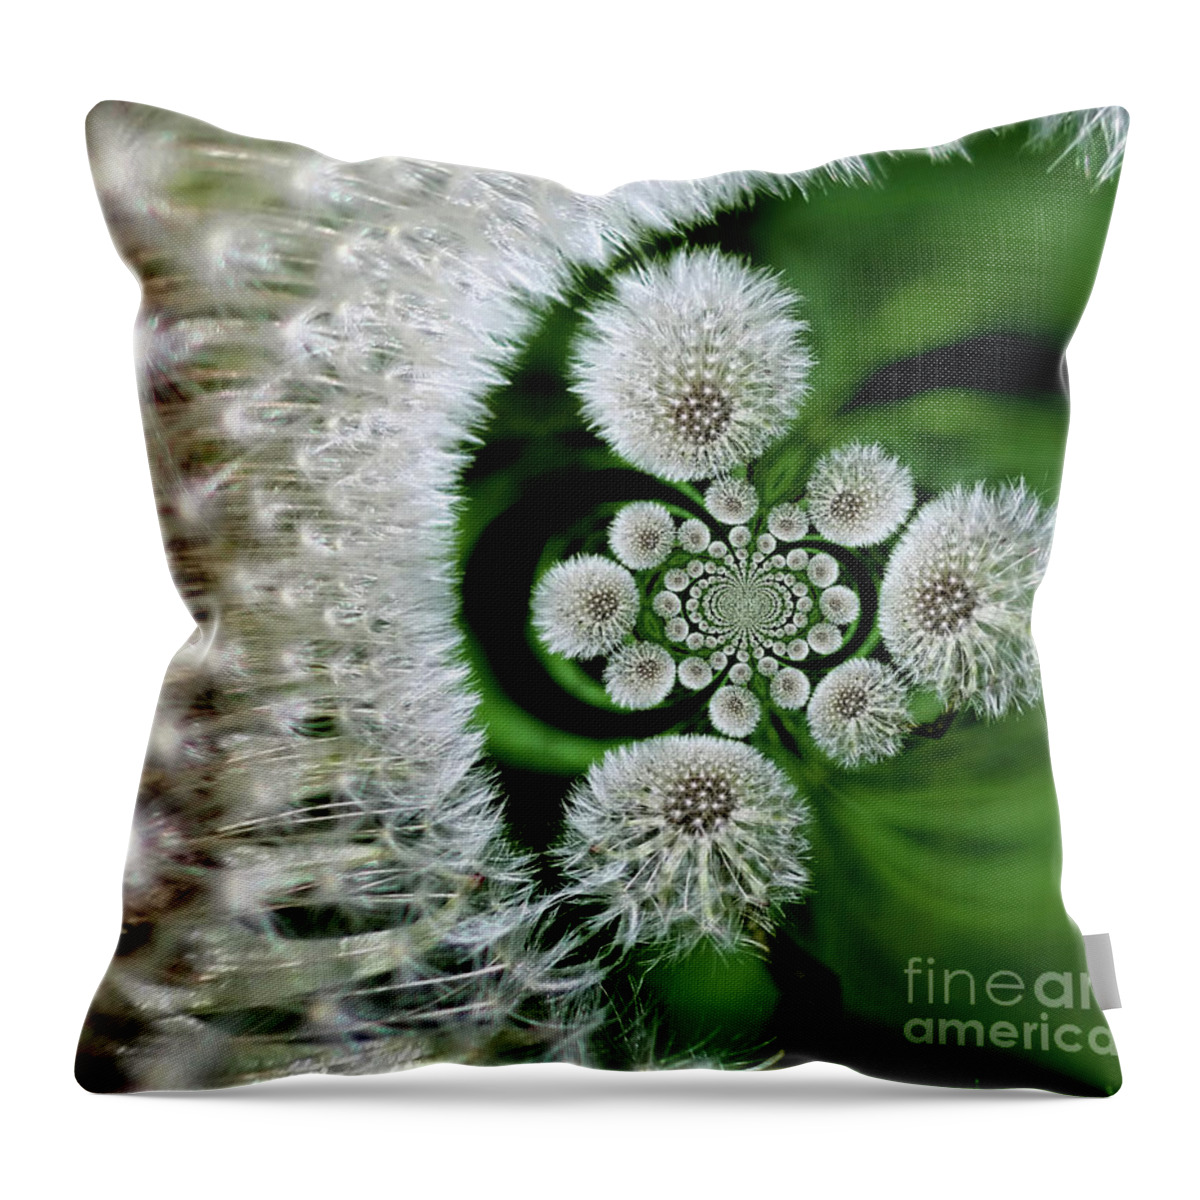 Dandelion Throw Pillow featuring the photograph Dandelion Fluff Abstract by Smilin Eyes Treasures